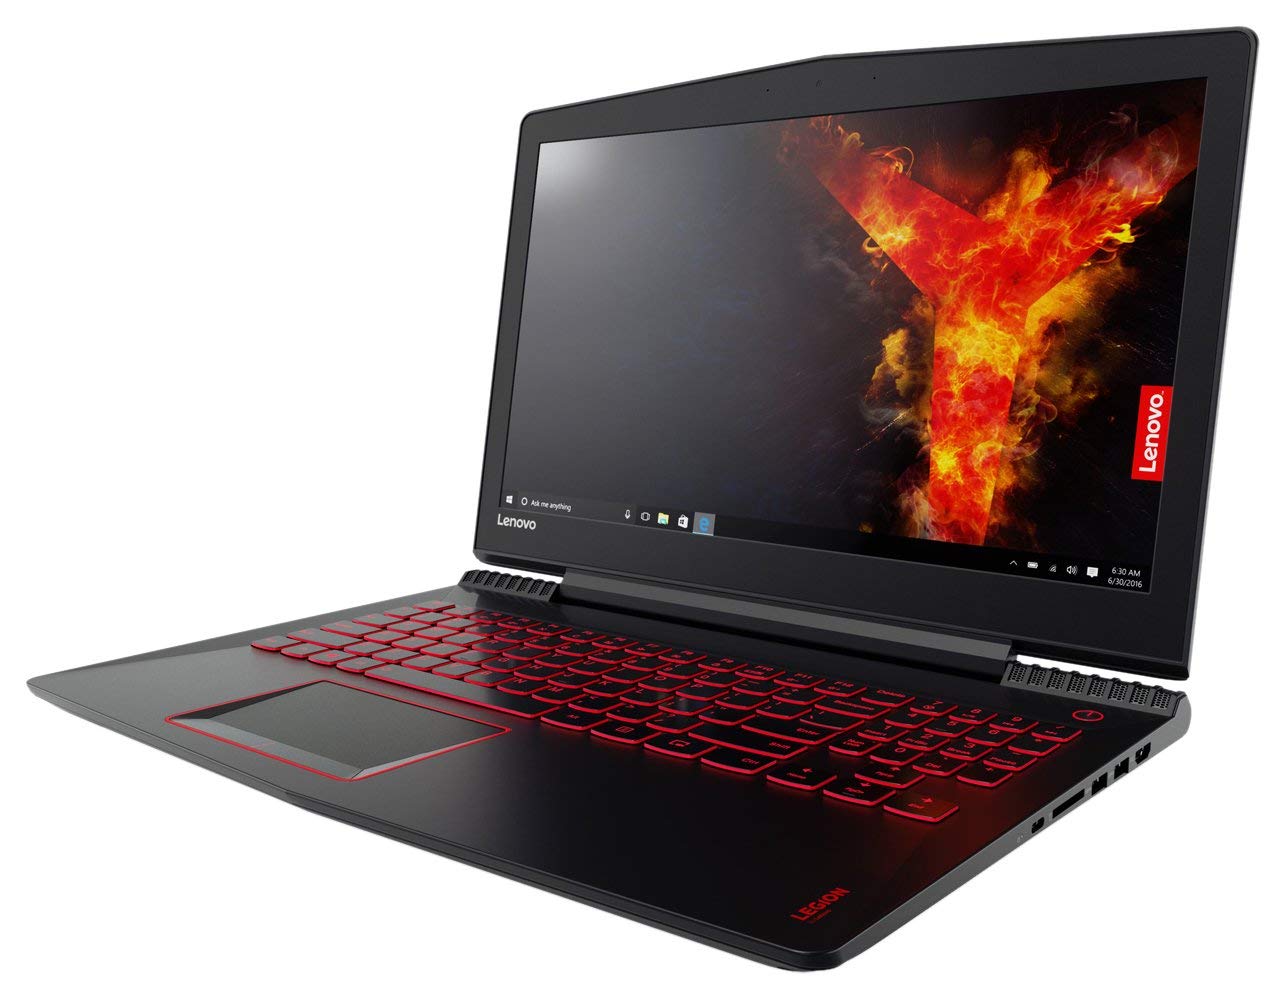 What are the best gaming laptops you can buy right now?